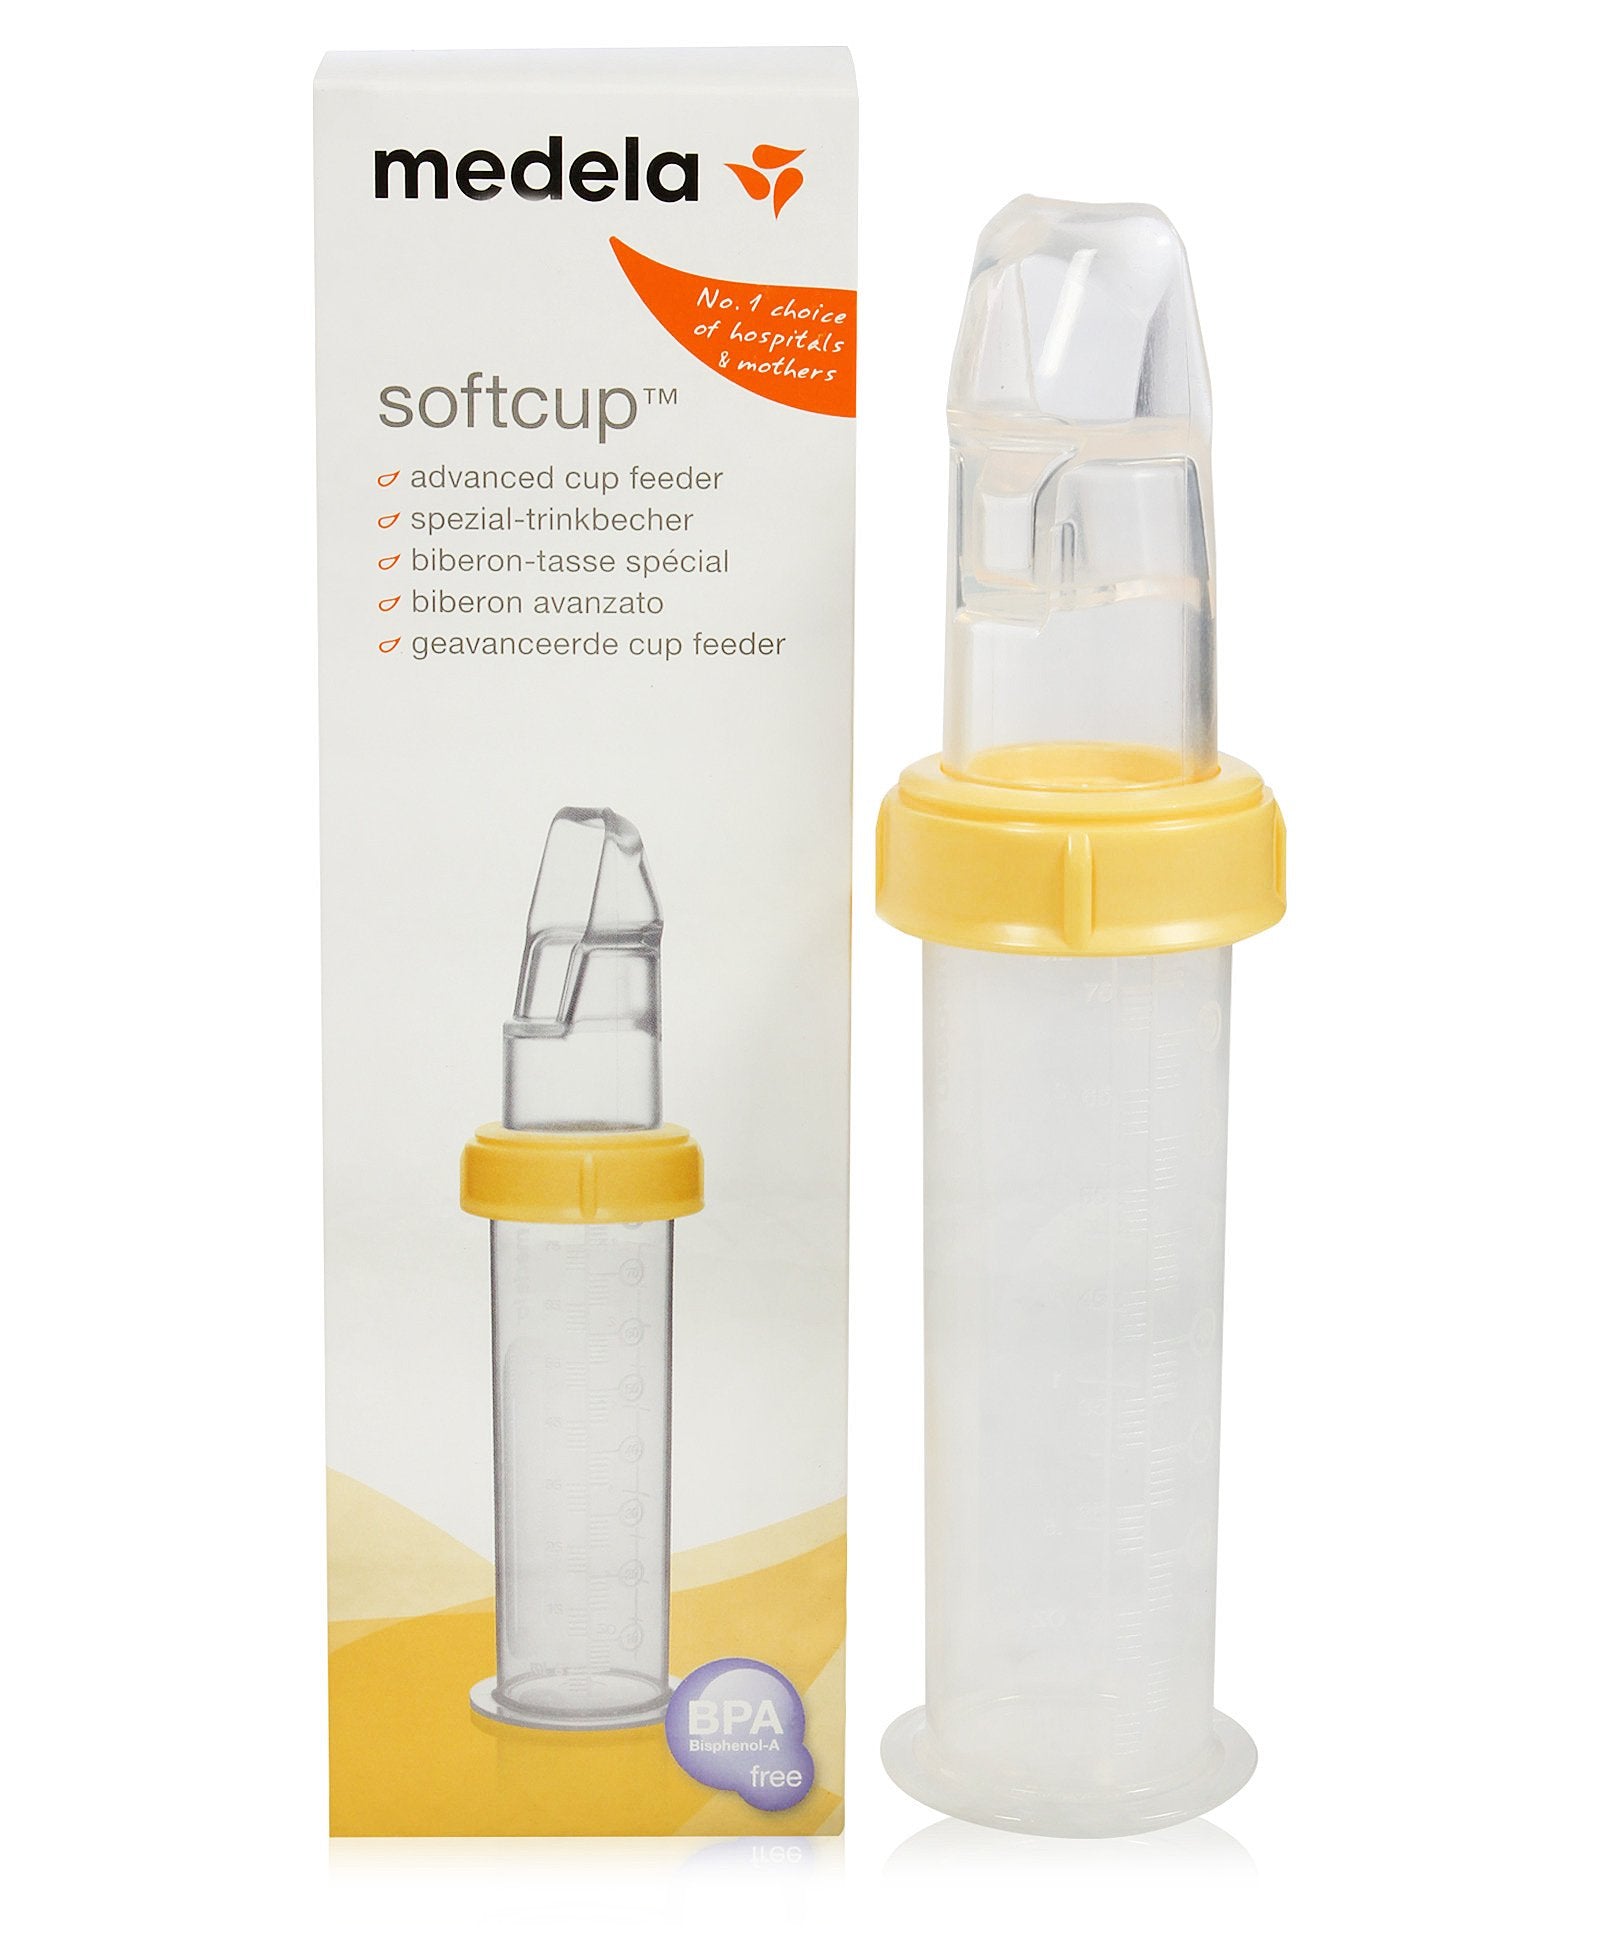 Medela SoftFeeder - NOW 20% OFF! – Birth and Baby